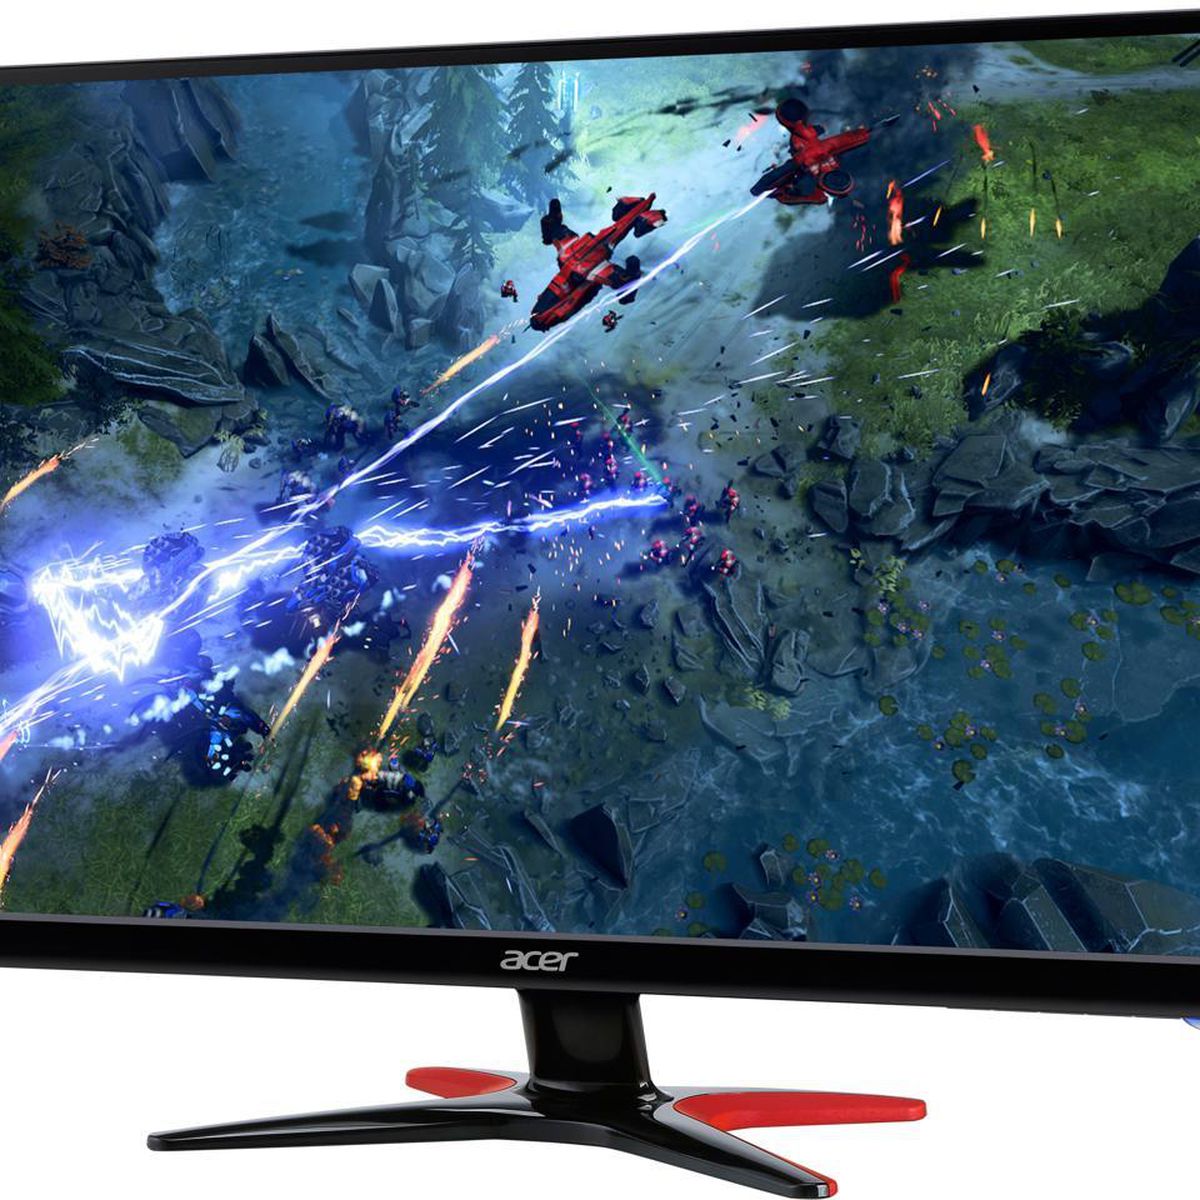 product shot of the Acer GF276 gaming monitor